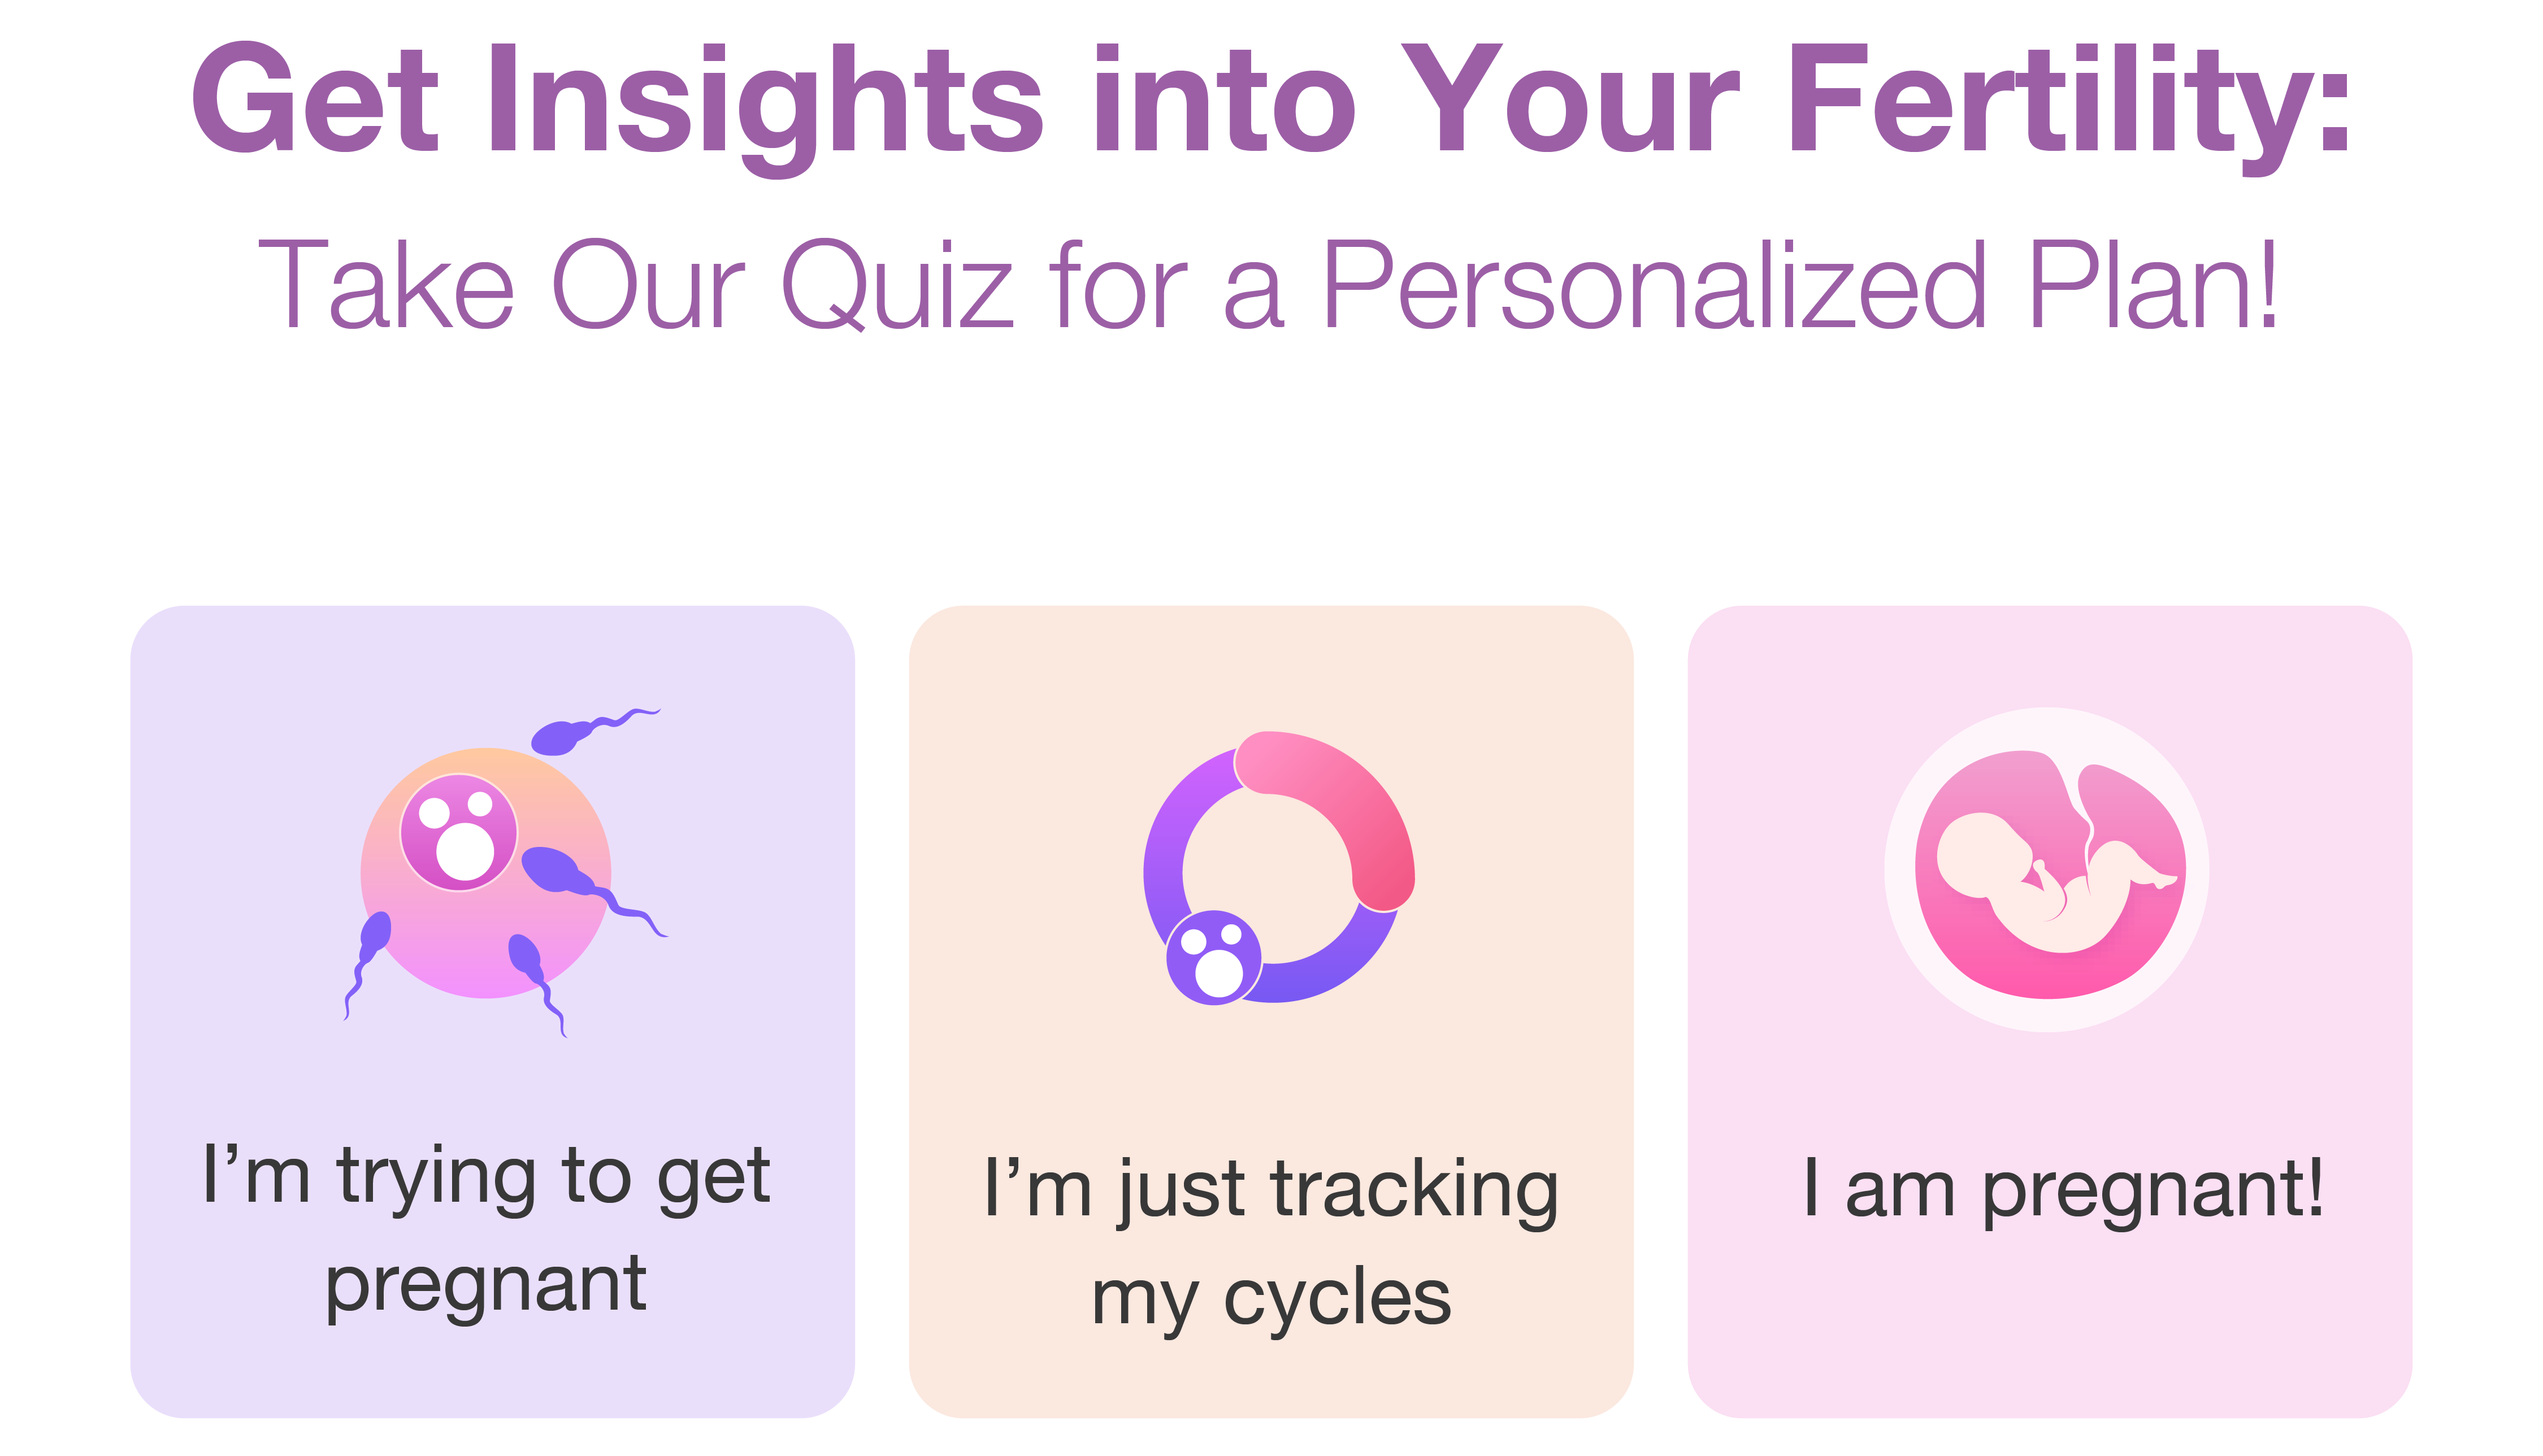 Get Insights into Your Fertility